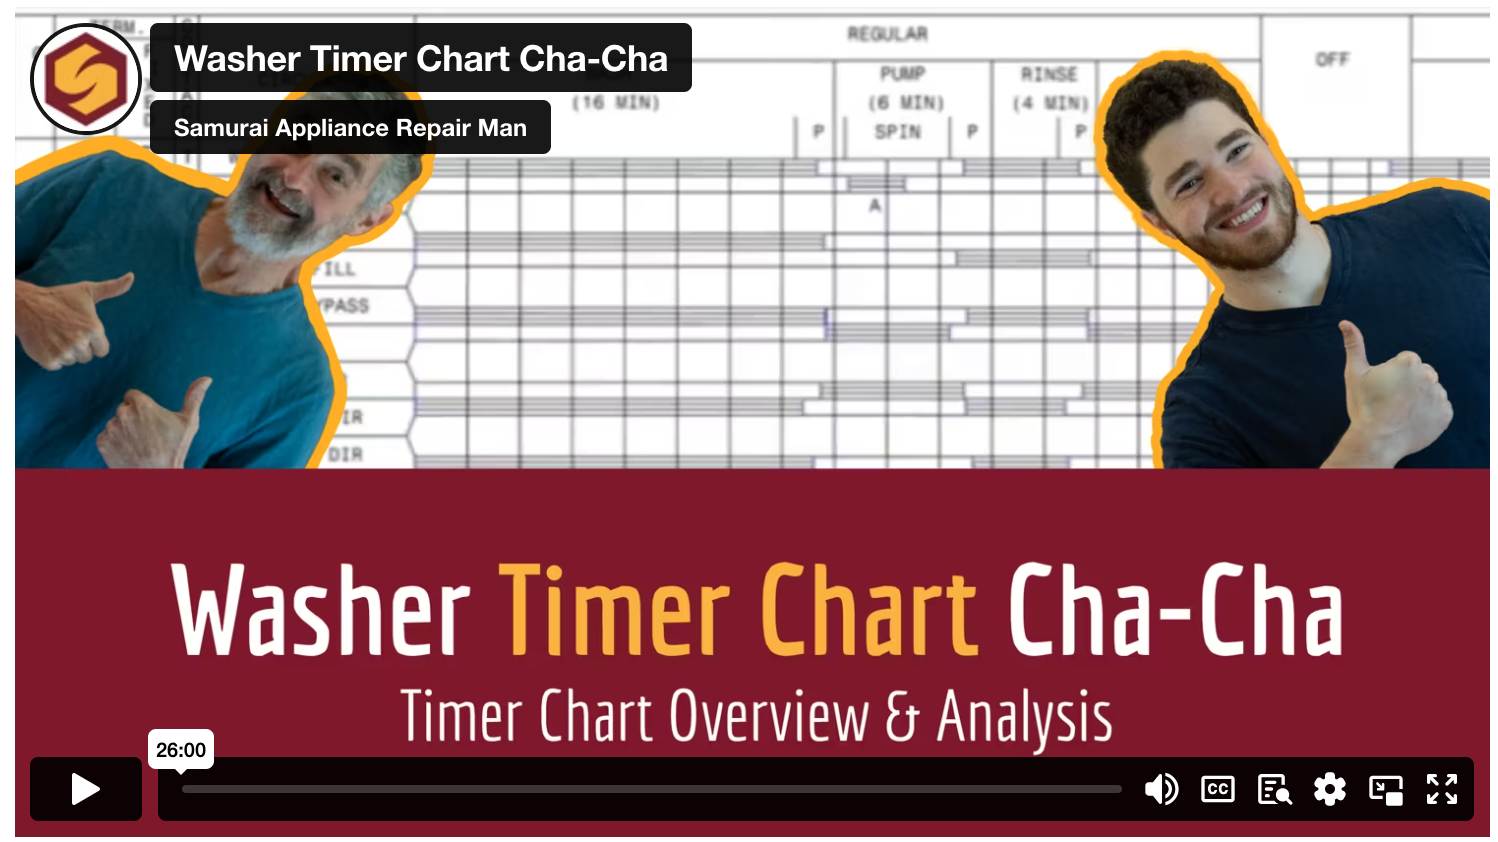 Read Timer Charts with Certainty Using the Timer Chart Cha-Cha